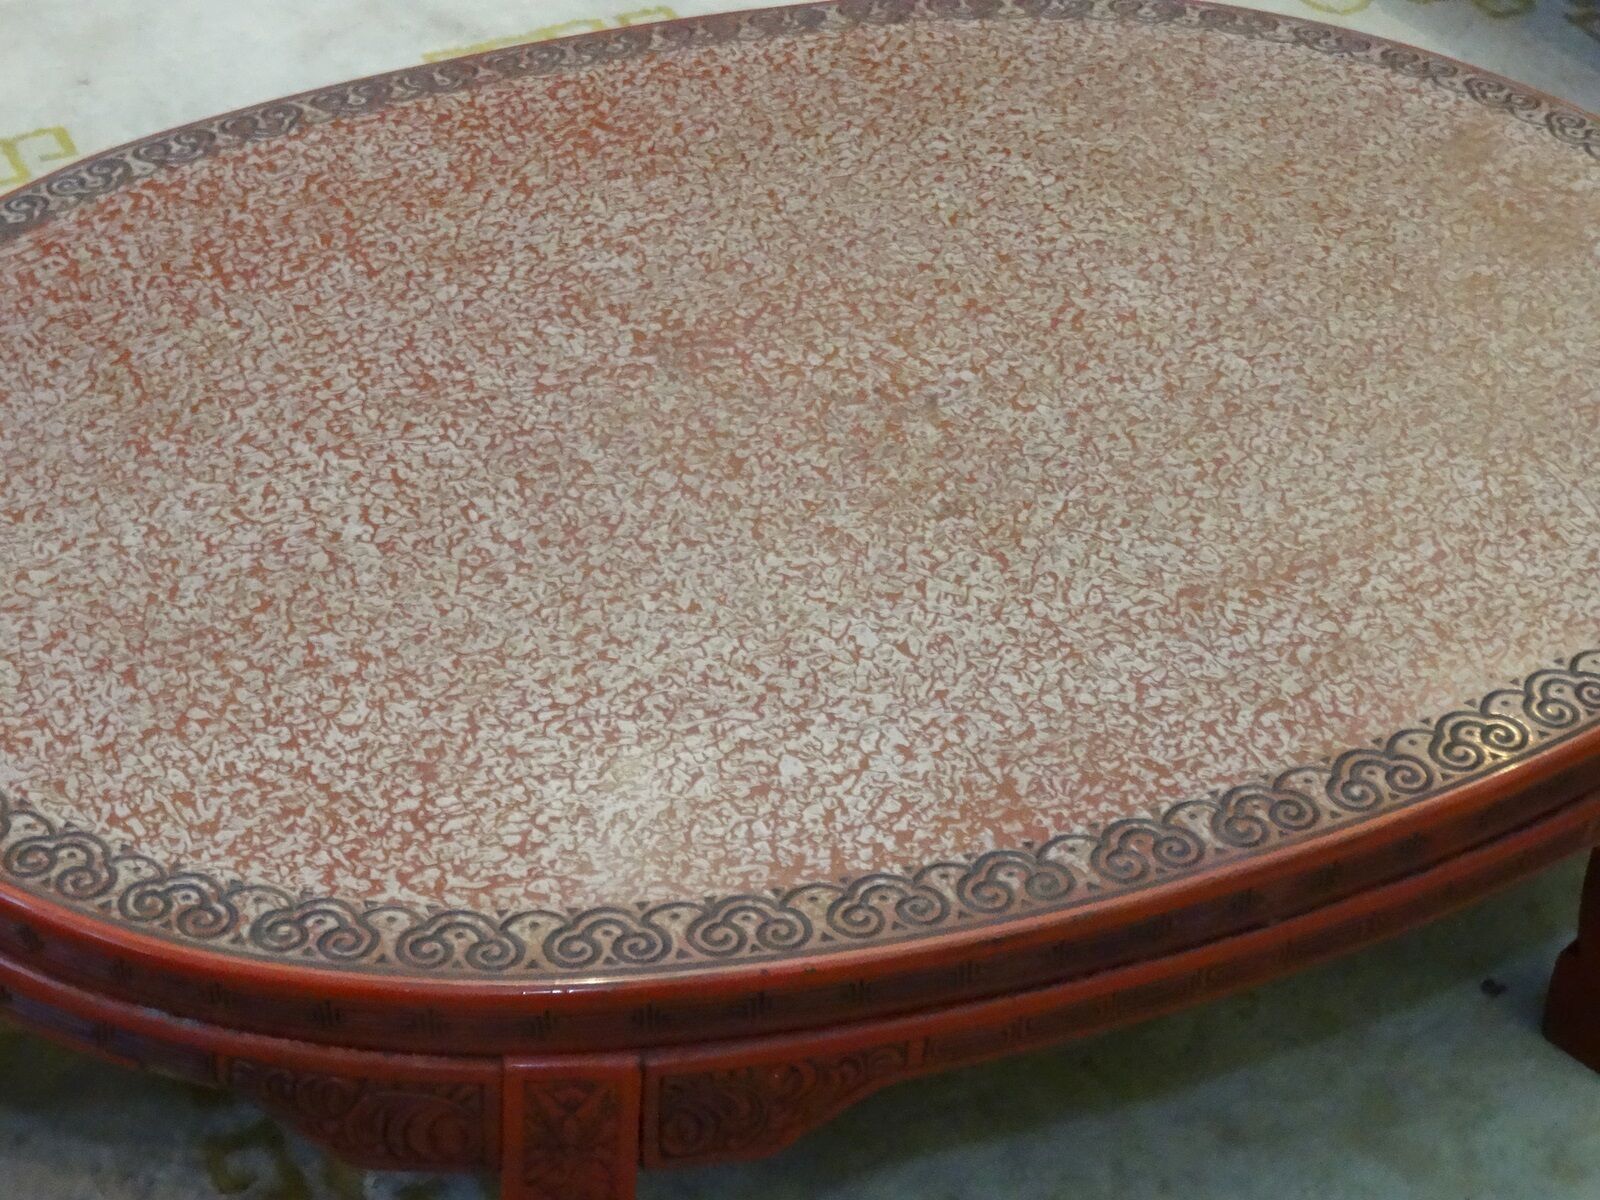 ANTIQUE LATE 19 c. CHINESE LACQUER INTRICATE CARVED CINNABAR COFFEE TABLE Без бренда - фотография #4